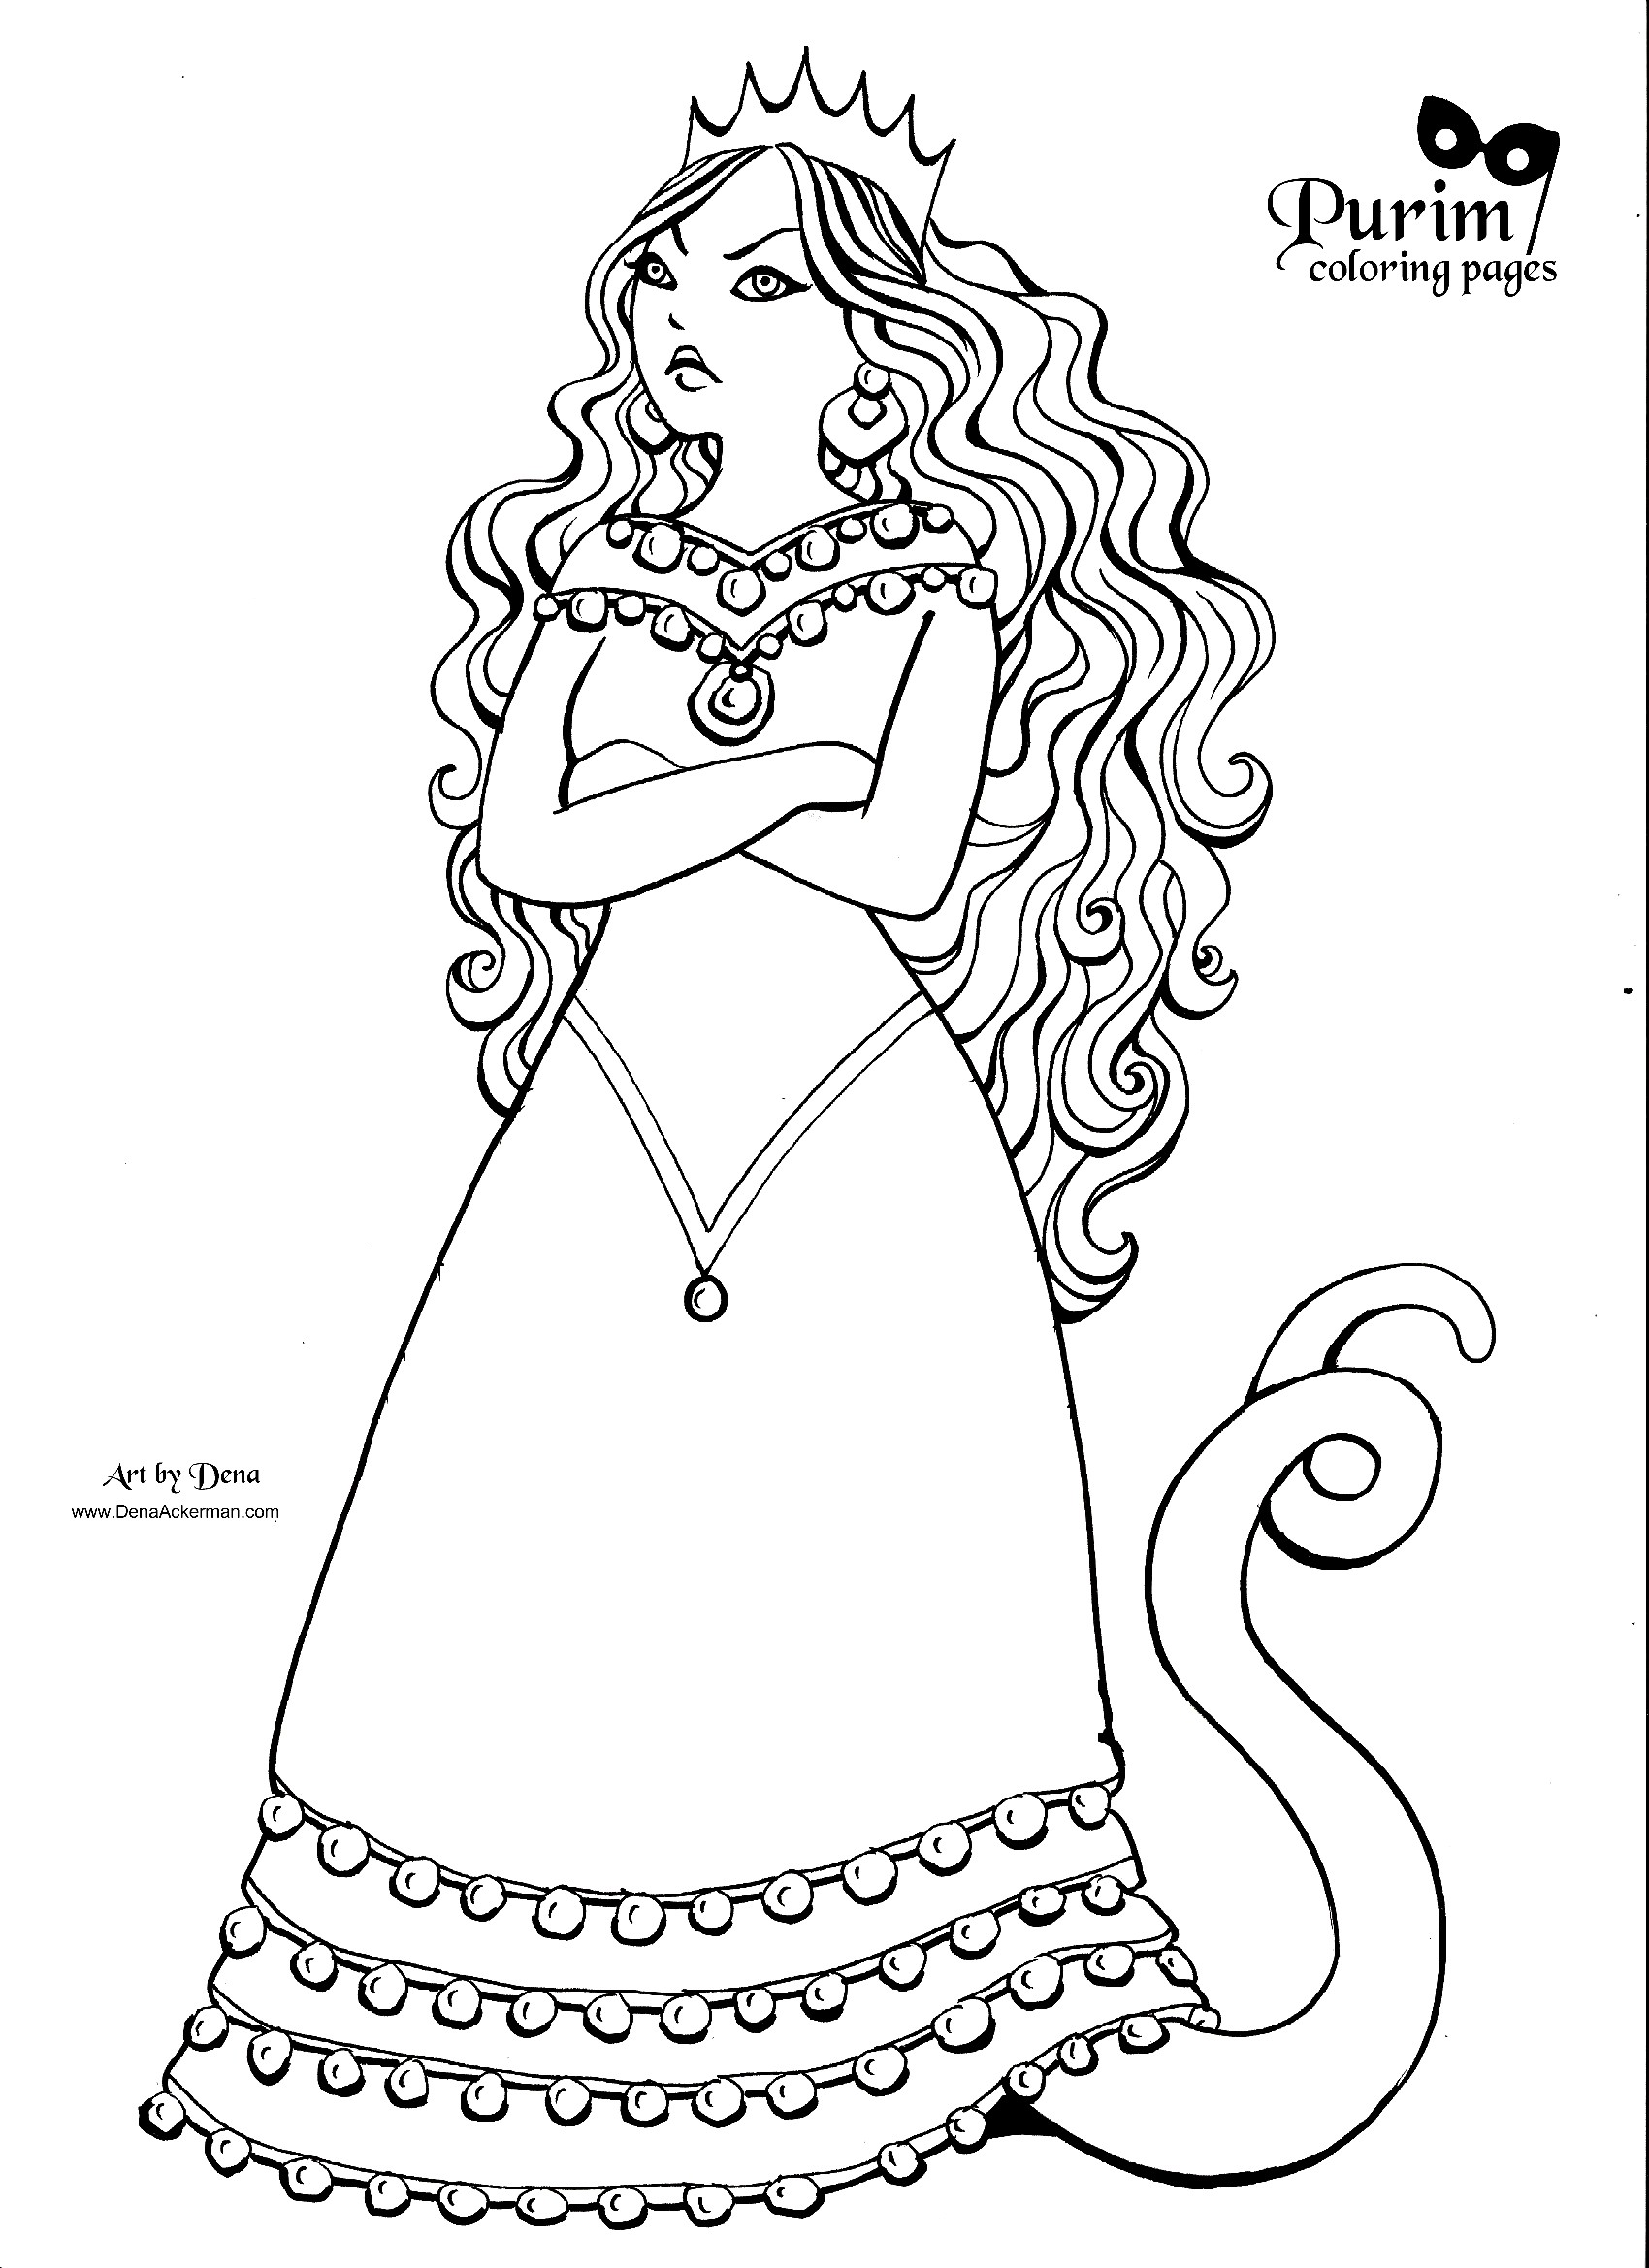 Purim Coloring Pages 10